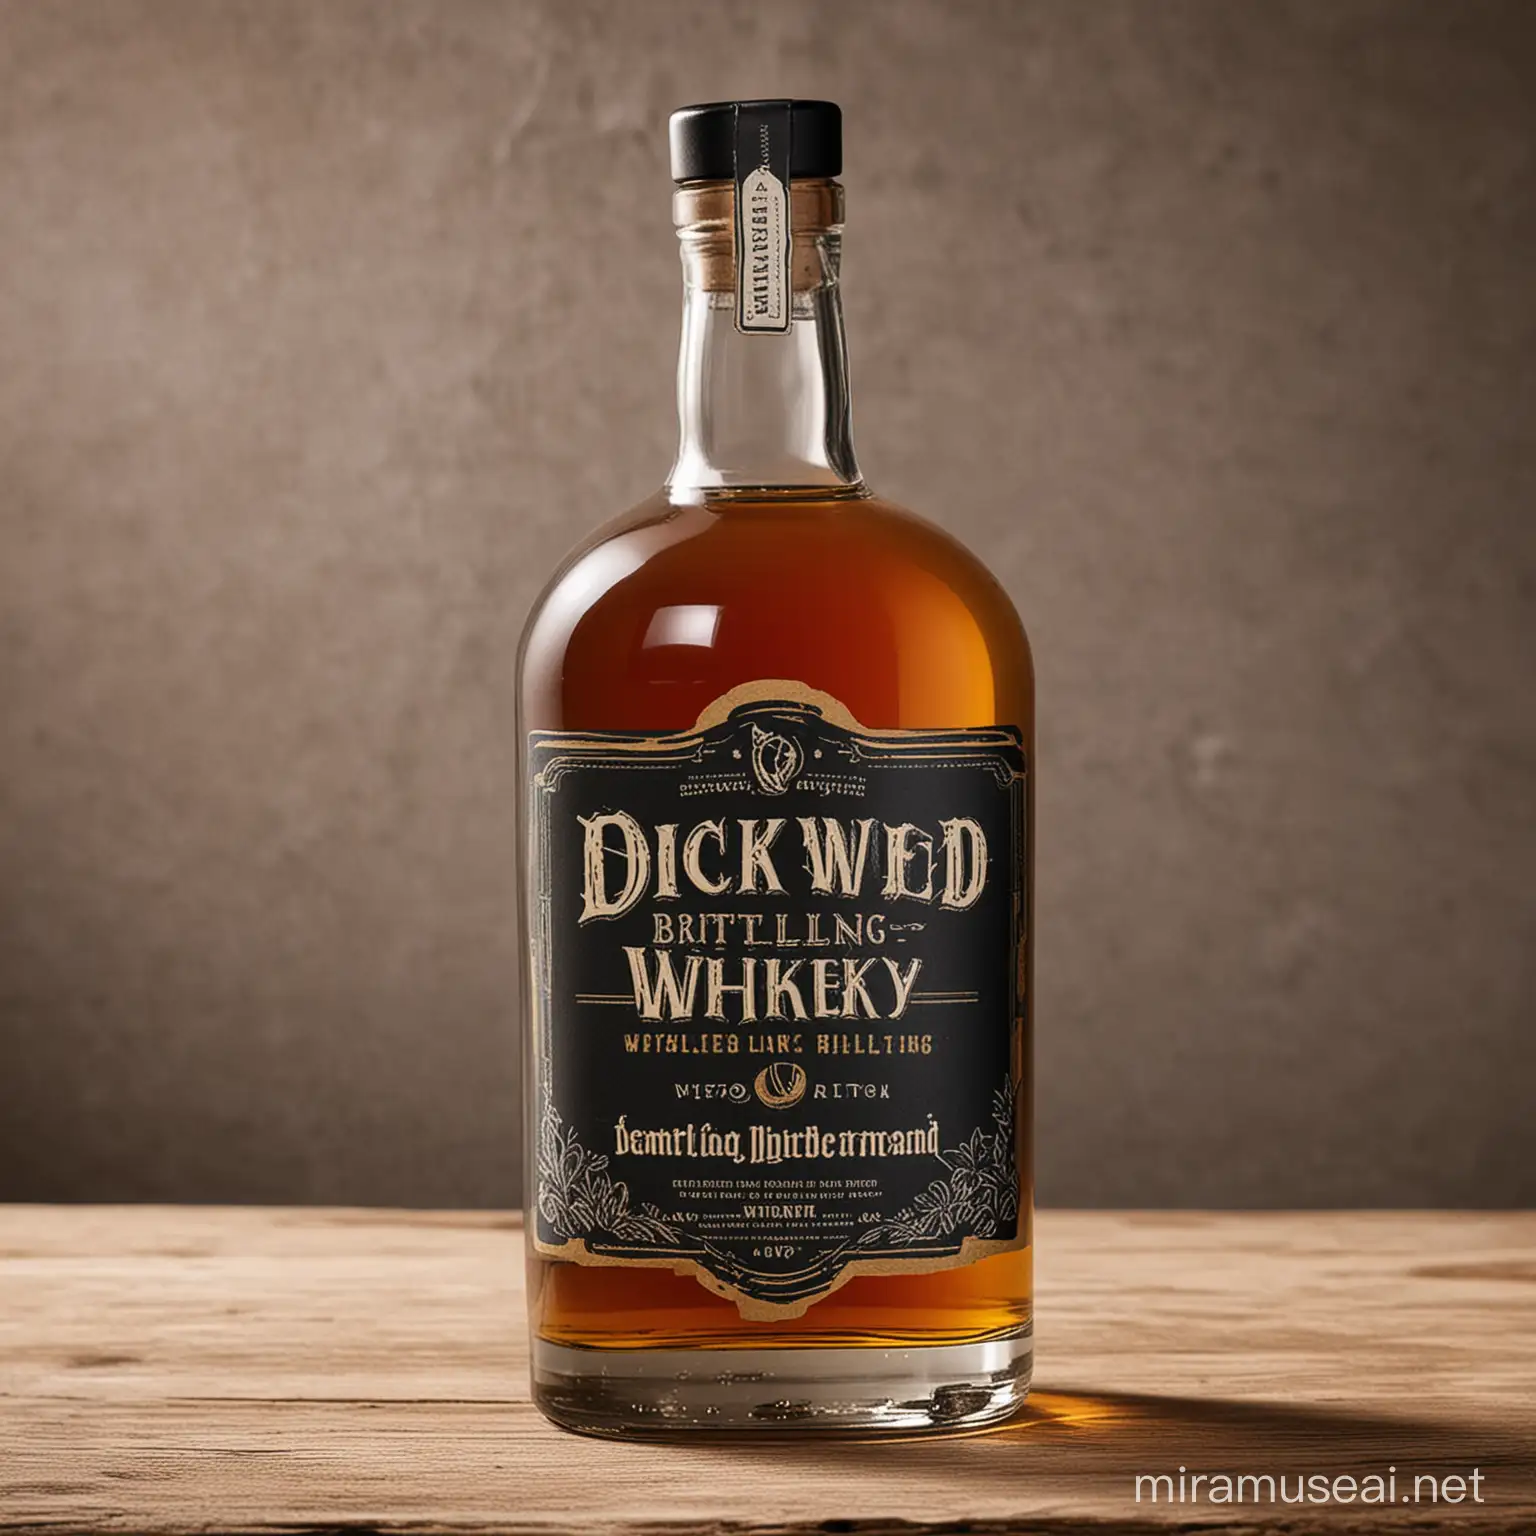 Packaging for bottle of dick weed whiskey, company Blackwater Distilling.